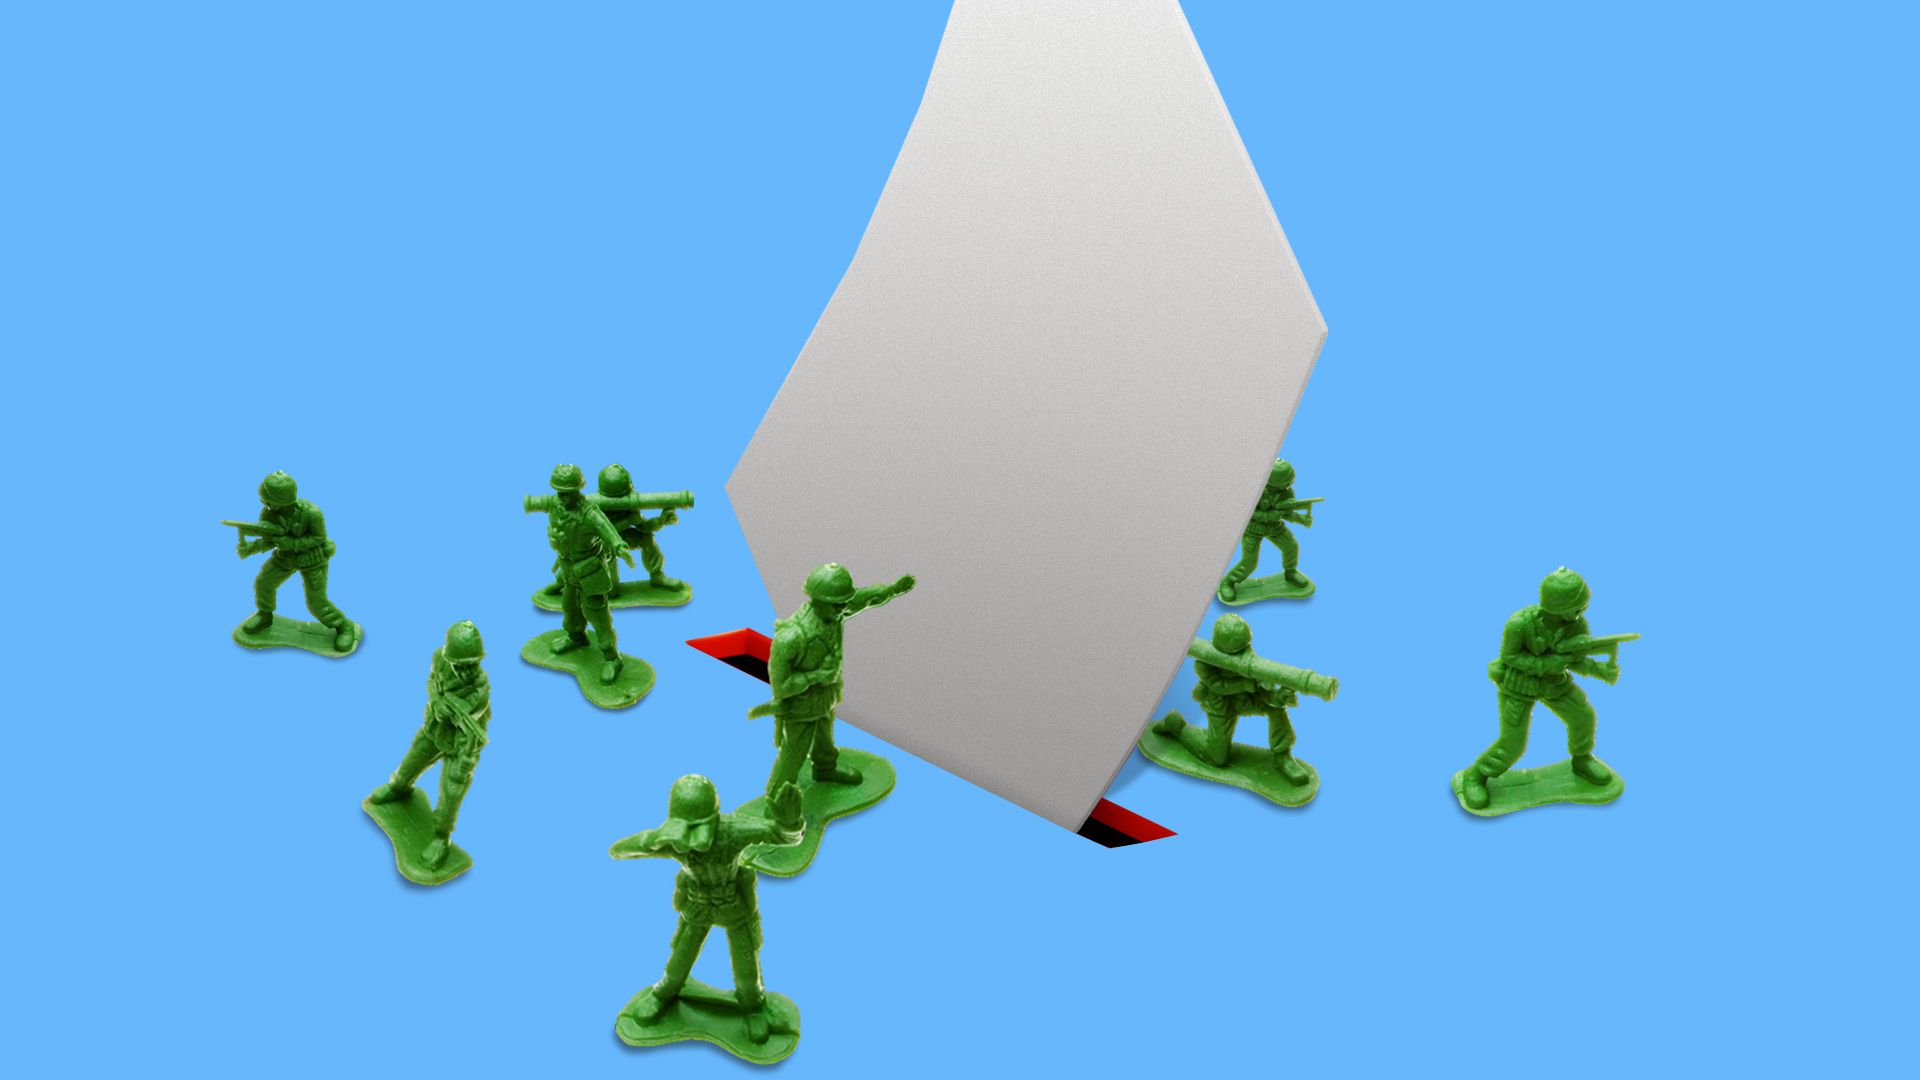 Illustration of toy soldiers protecting a ballot